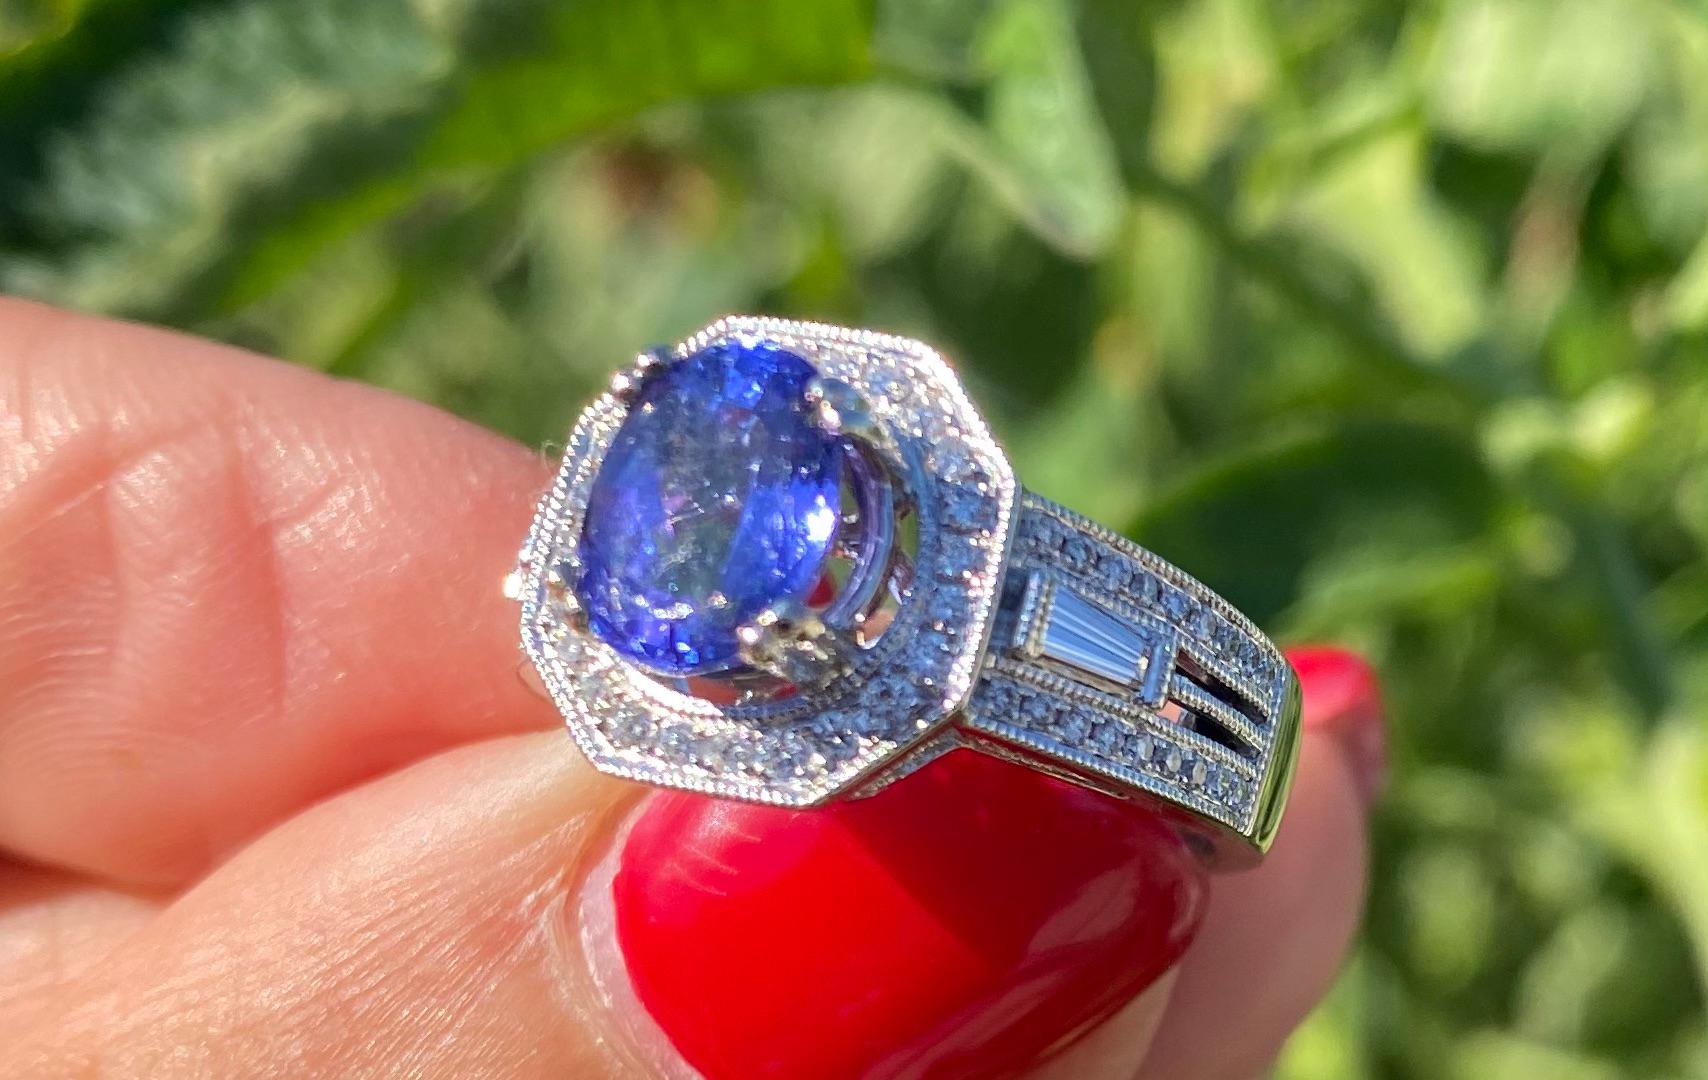 Contemporary, Hexagon Tanzanite and Diamond Ring, VS 2.70 TCW, 18 KT
Center oval shaped Tanzanite measuring 8.40 x 7 mm with a weight of 1.90 carat.
Hexagon style setting of halo diamond bezel accents round and princess cut diamonds
The weight of